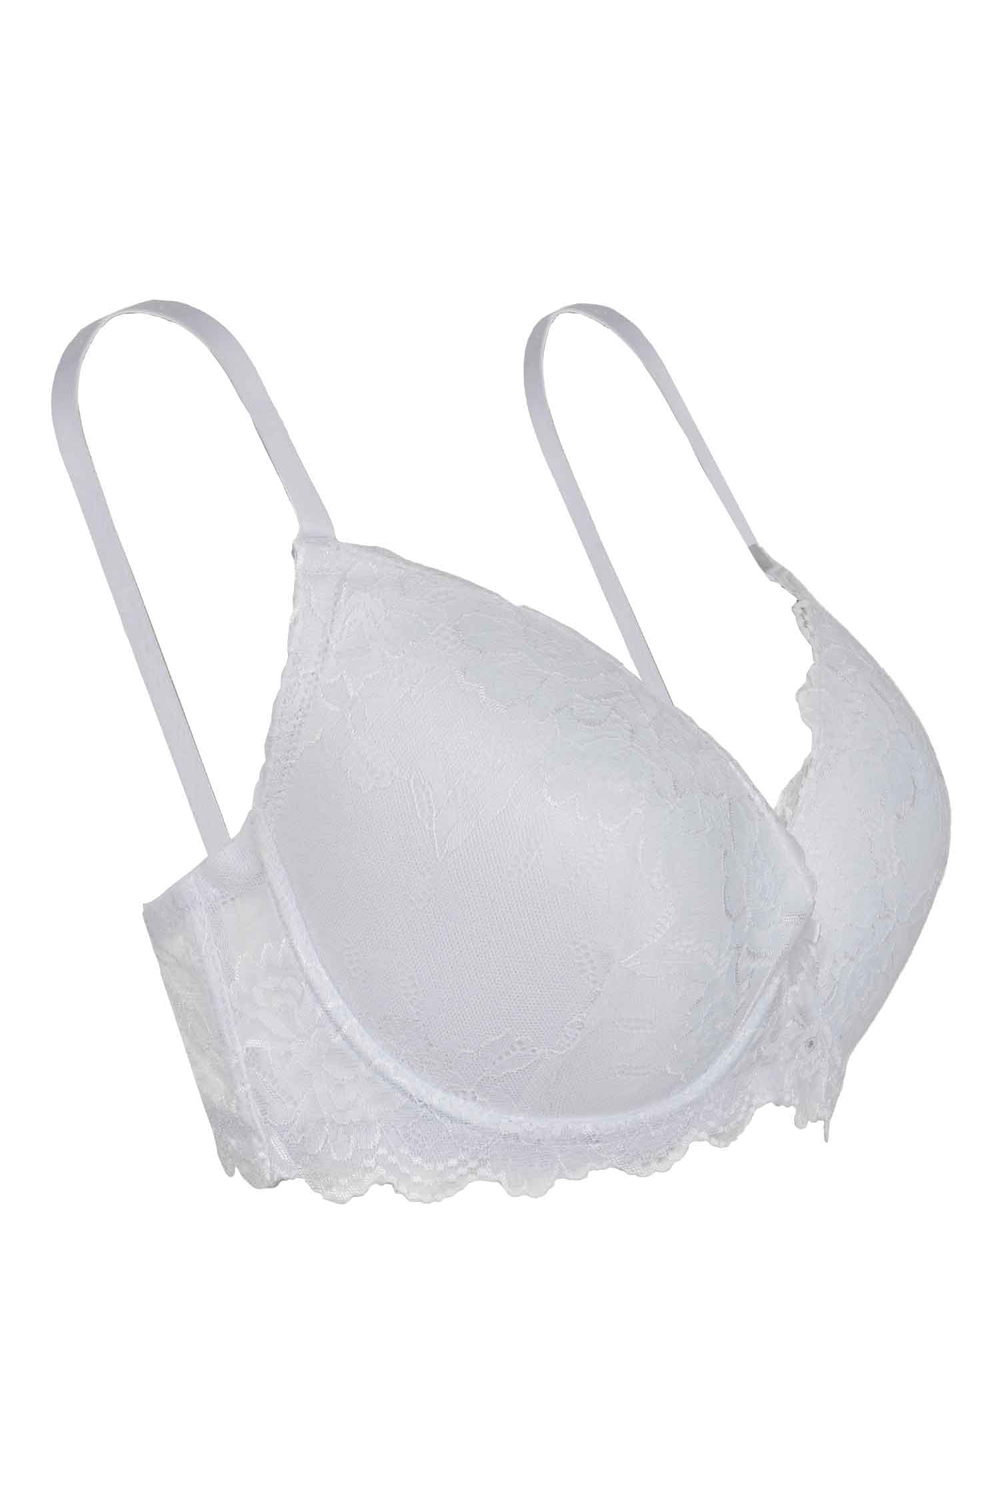 Shea Floral White Wireless Push Up, 32A-38D